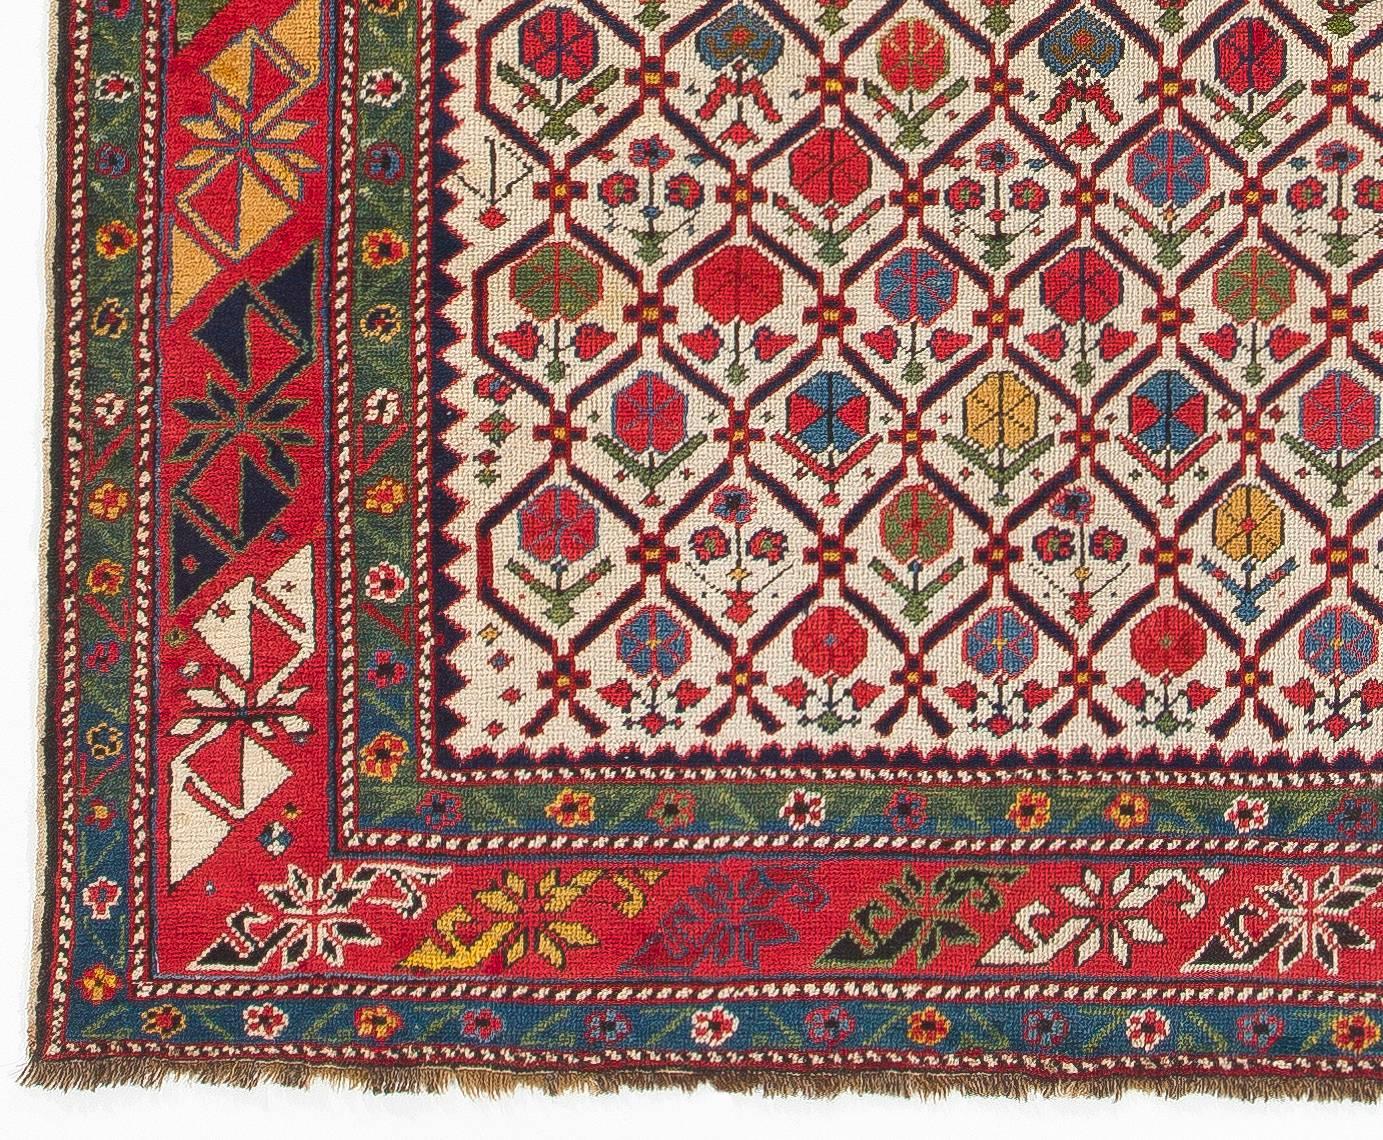 Antique Caucasian Shirvan prayer rug, circa 1850. 
Excellent condition, all original.
Some of the best colors we have seen in antique Shirvan rugs.